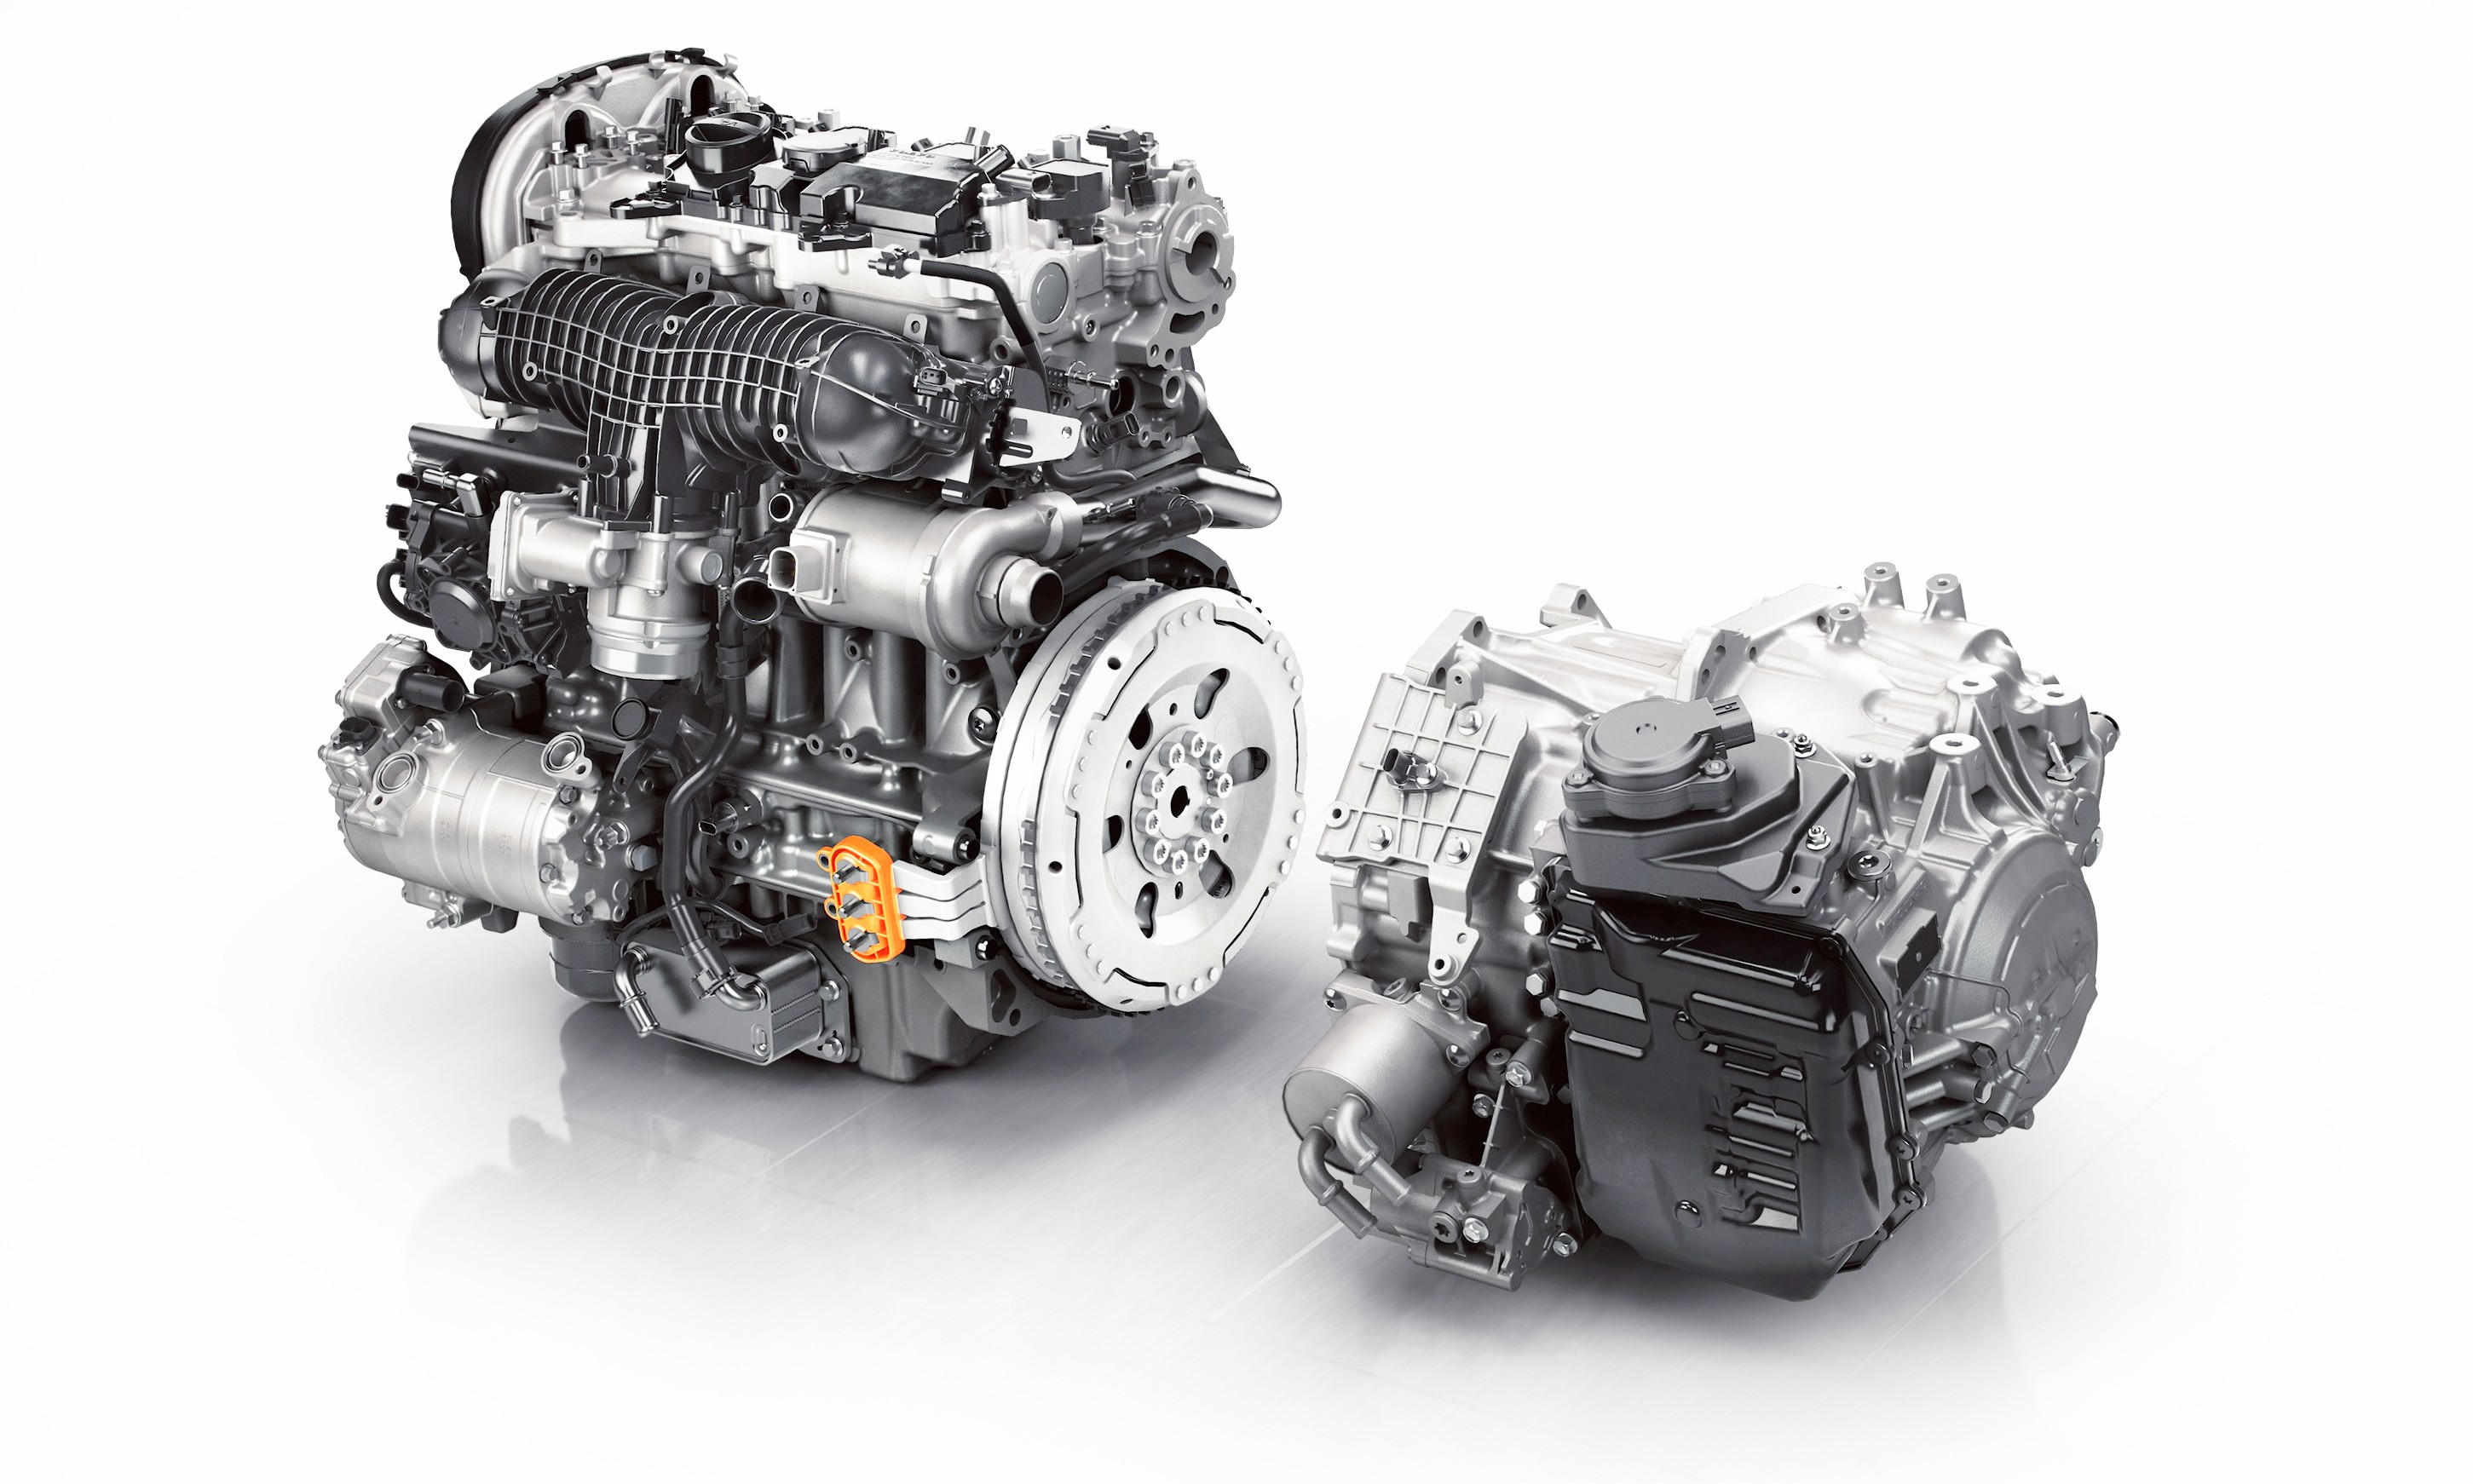 2015 VOLVO XC90 Powertrain Teaser - Twin-Engine PHEV with 400HP Dubbed